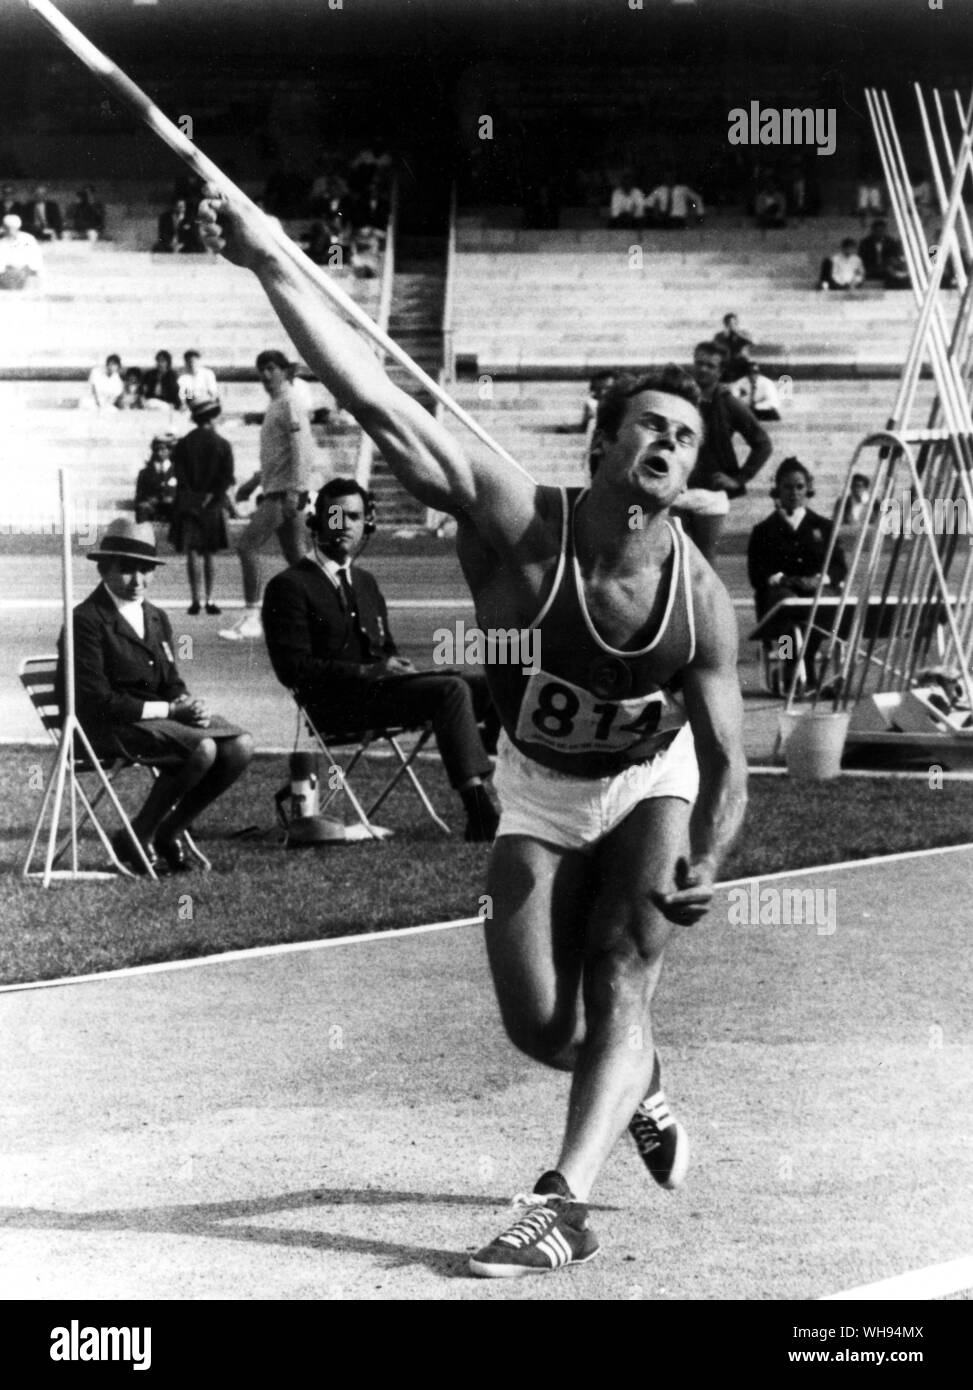 Mexico City Olympics 1968: Yanis Lusis of USSR hurls the javelin 90.10 metres to win the gold medal. Stock Photo